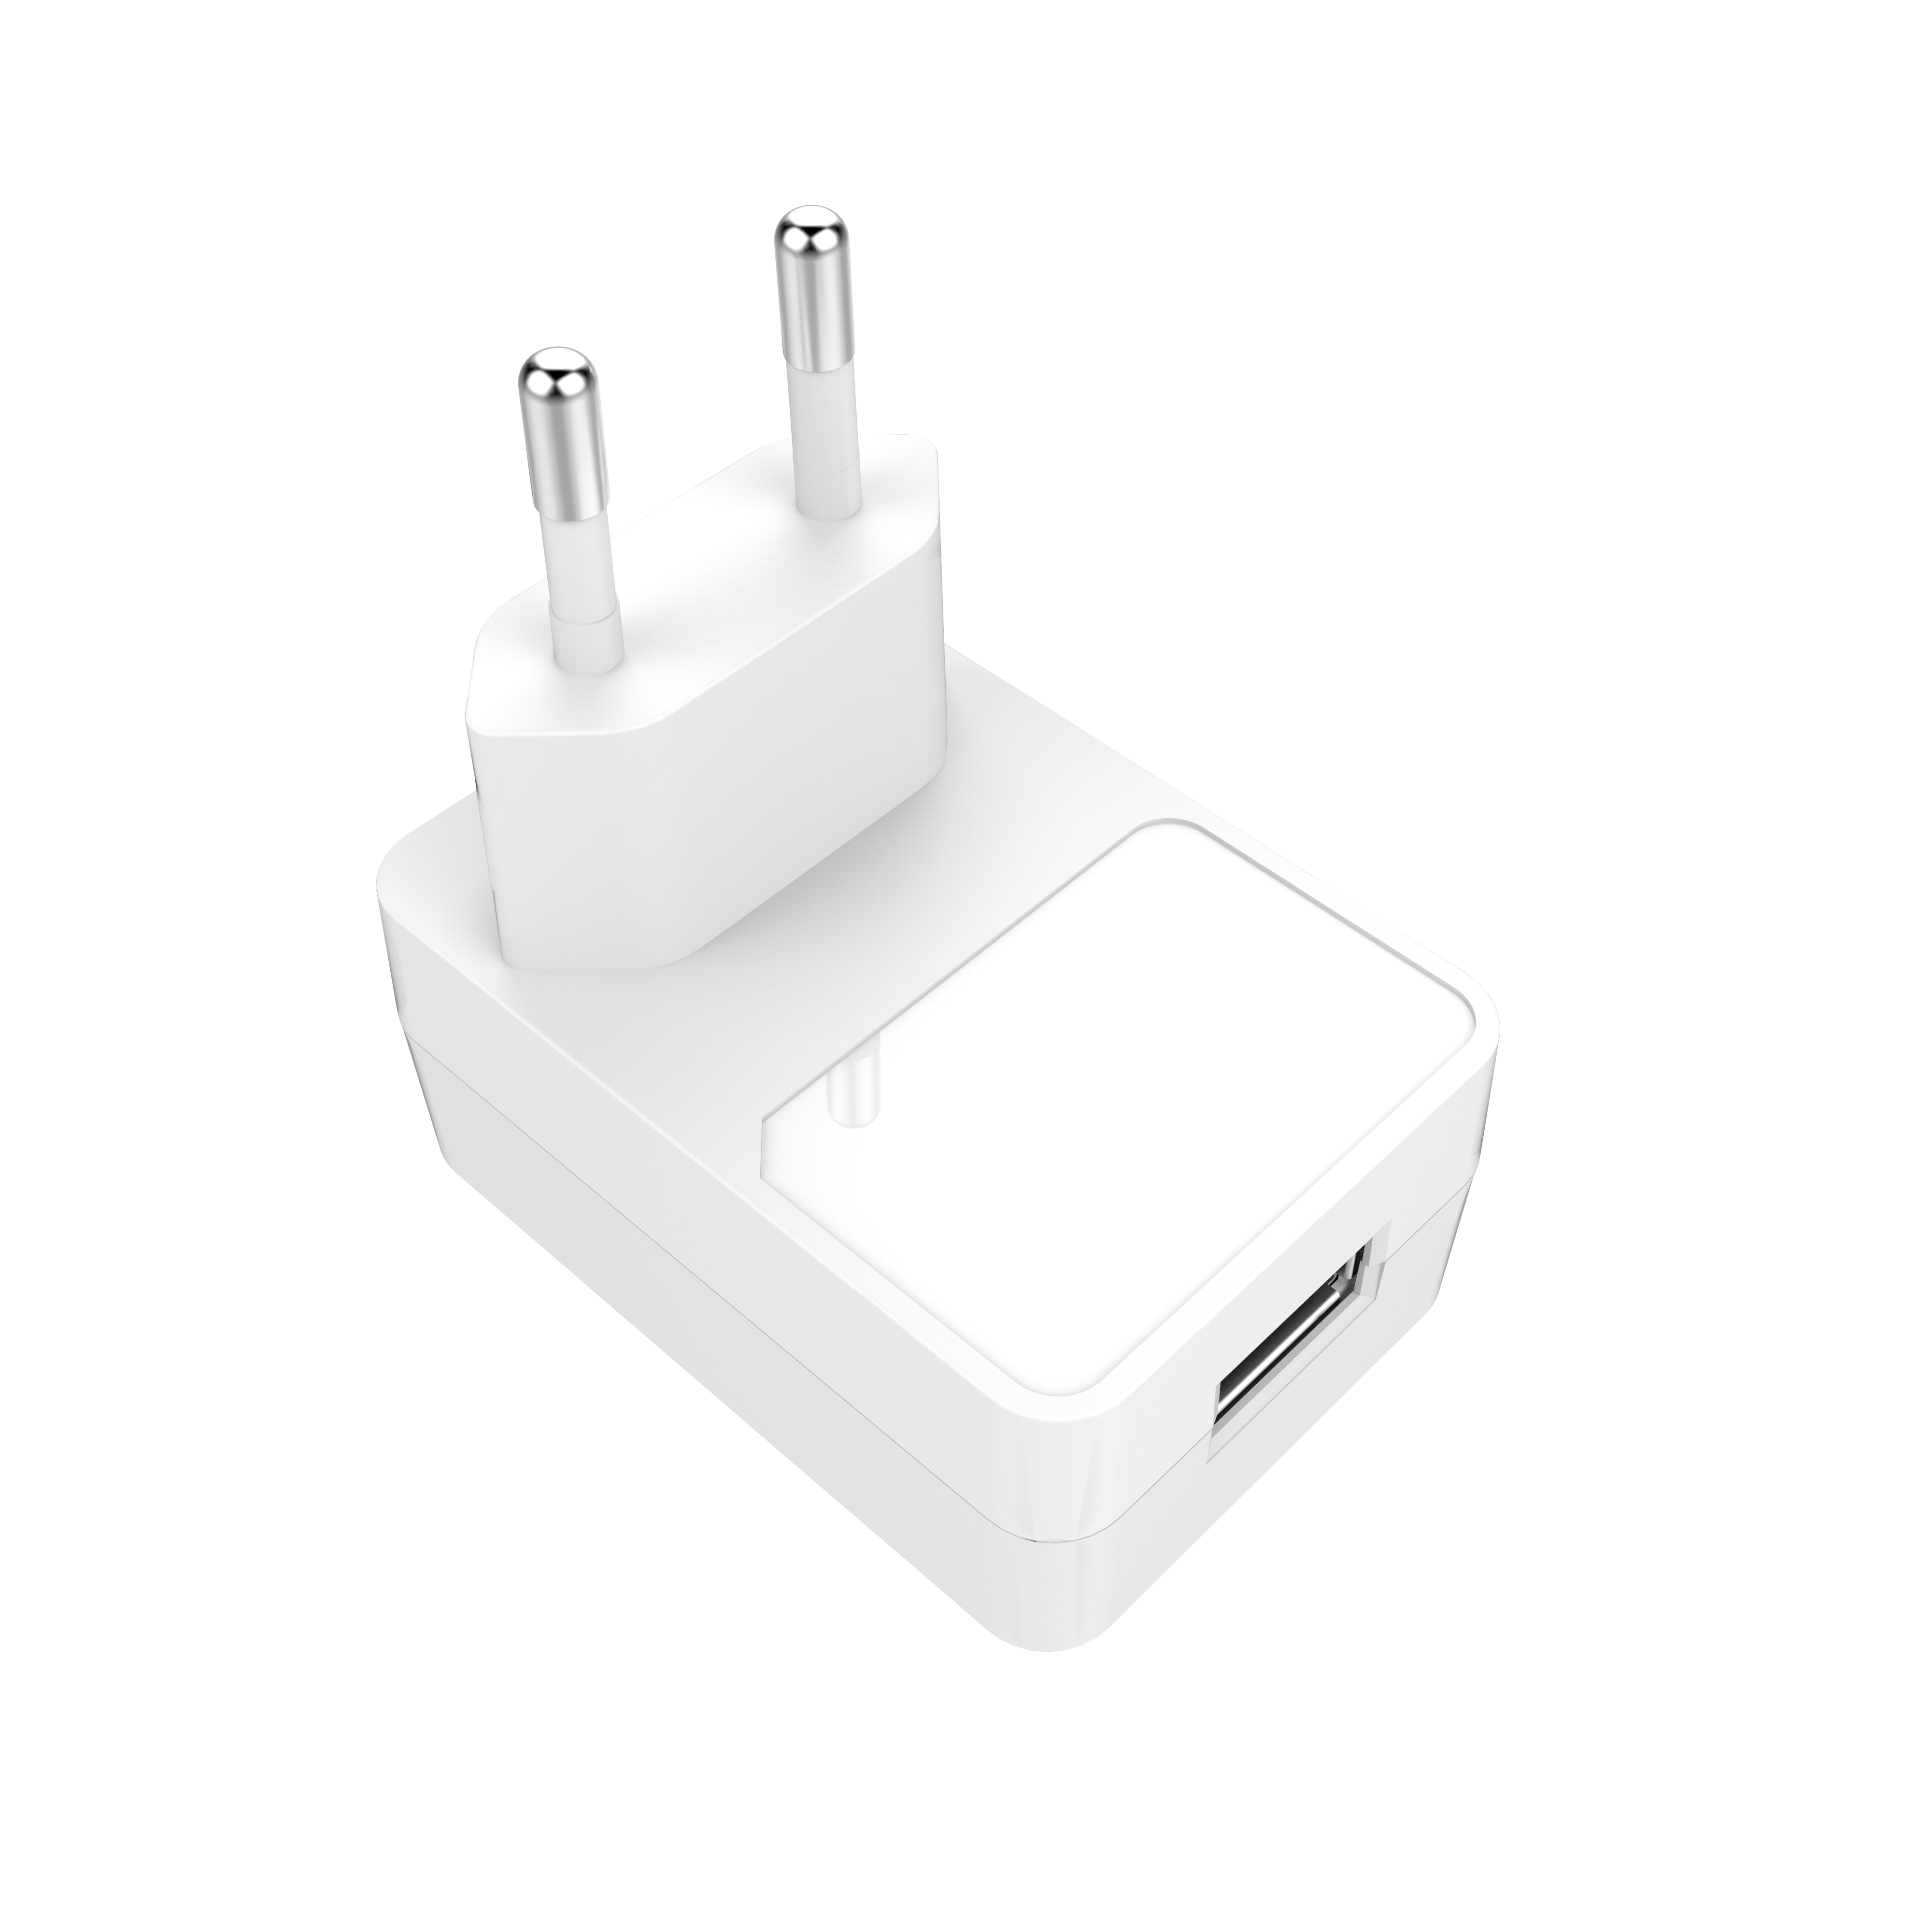 5v1a 5V 2A 1.5A 3A 2.5A usb charger power adapter for mobiles watch tablets with IEC62368/IEC61558/ETL1310 safety